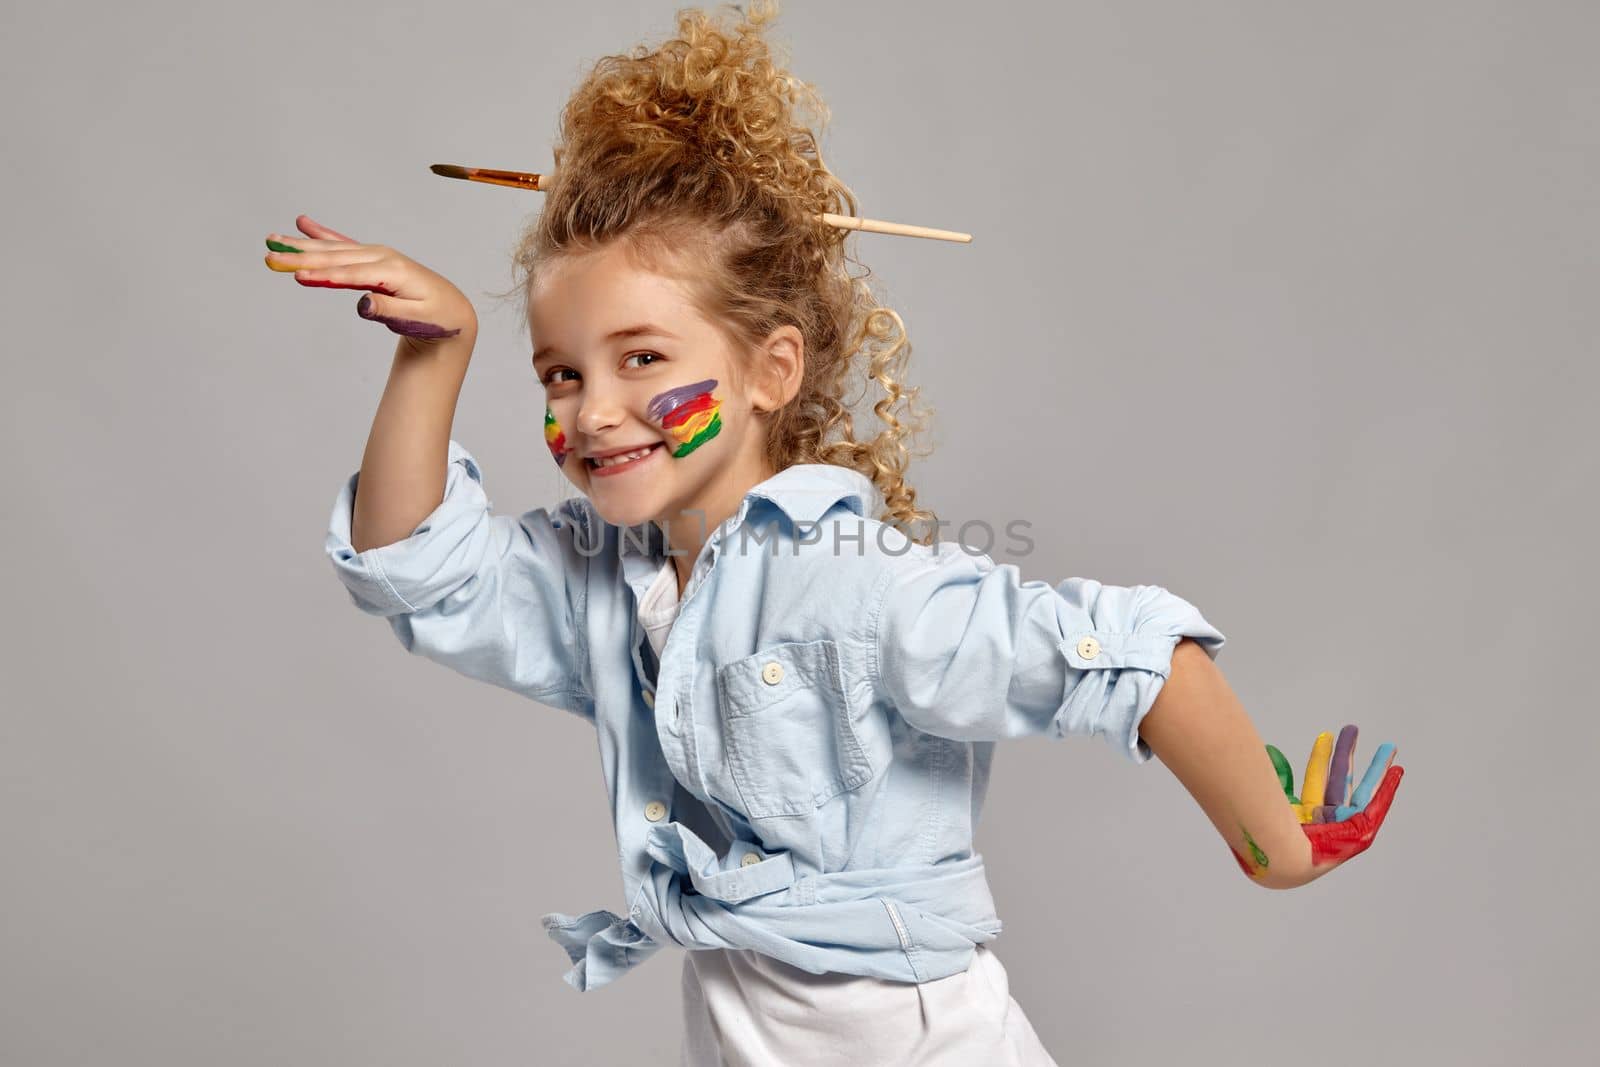 Funny schoolgirl having a brush in her chic curly blond hair, wearing in a blue shirt and white t-shirt. She is posing with a painted hands and cheeks, smiling and looking at the camera, on a gray background.